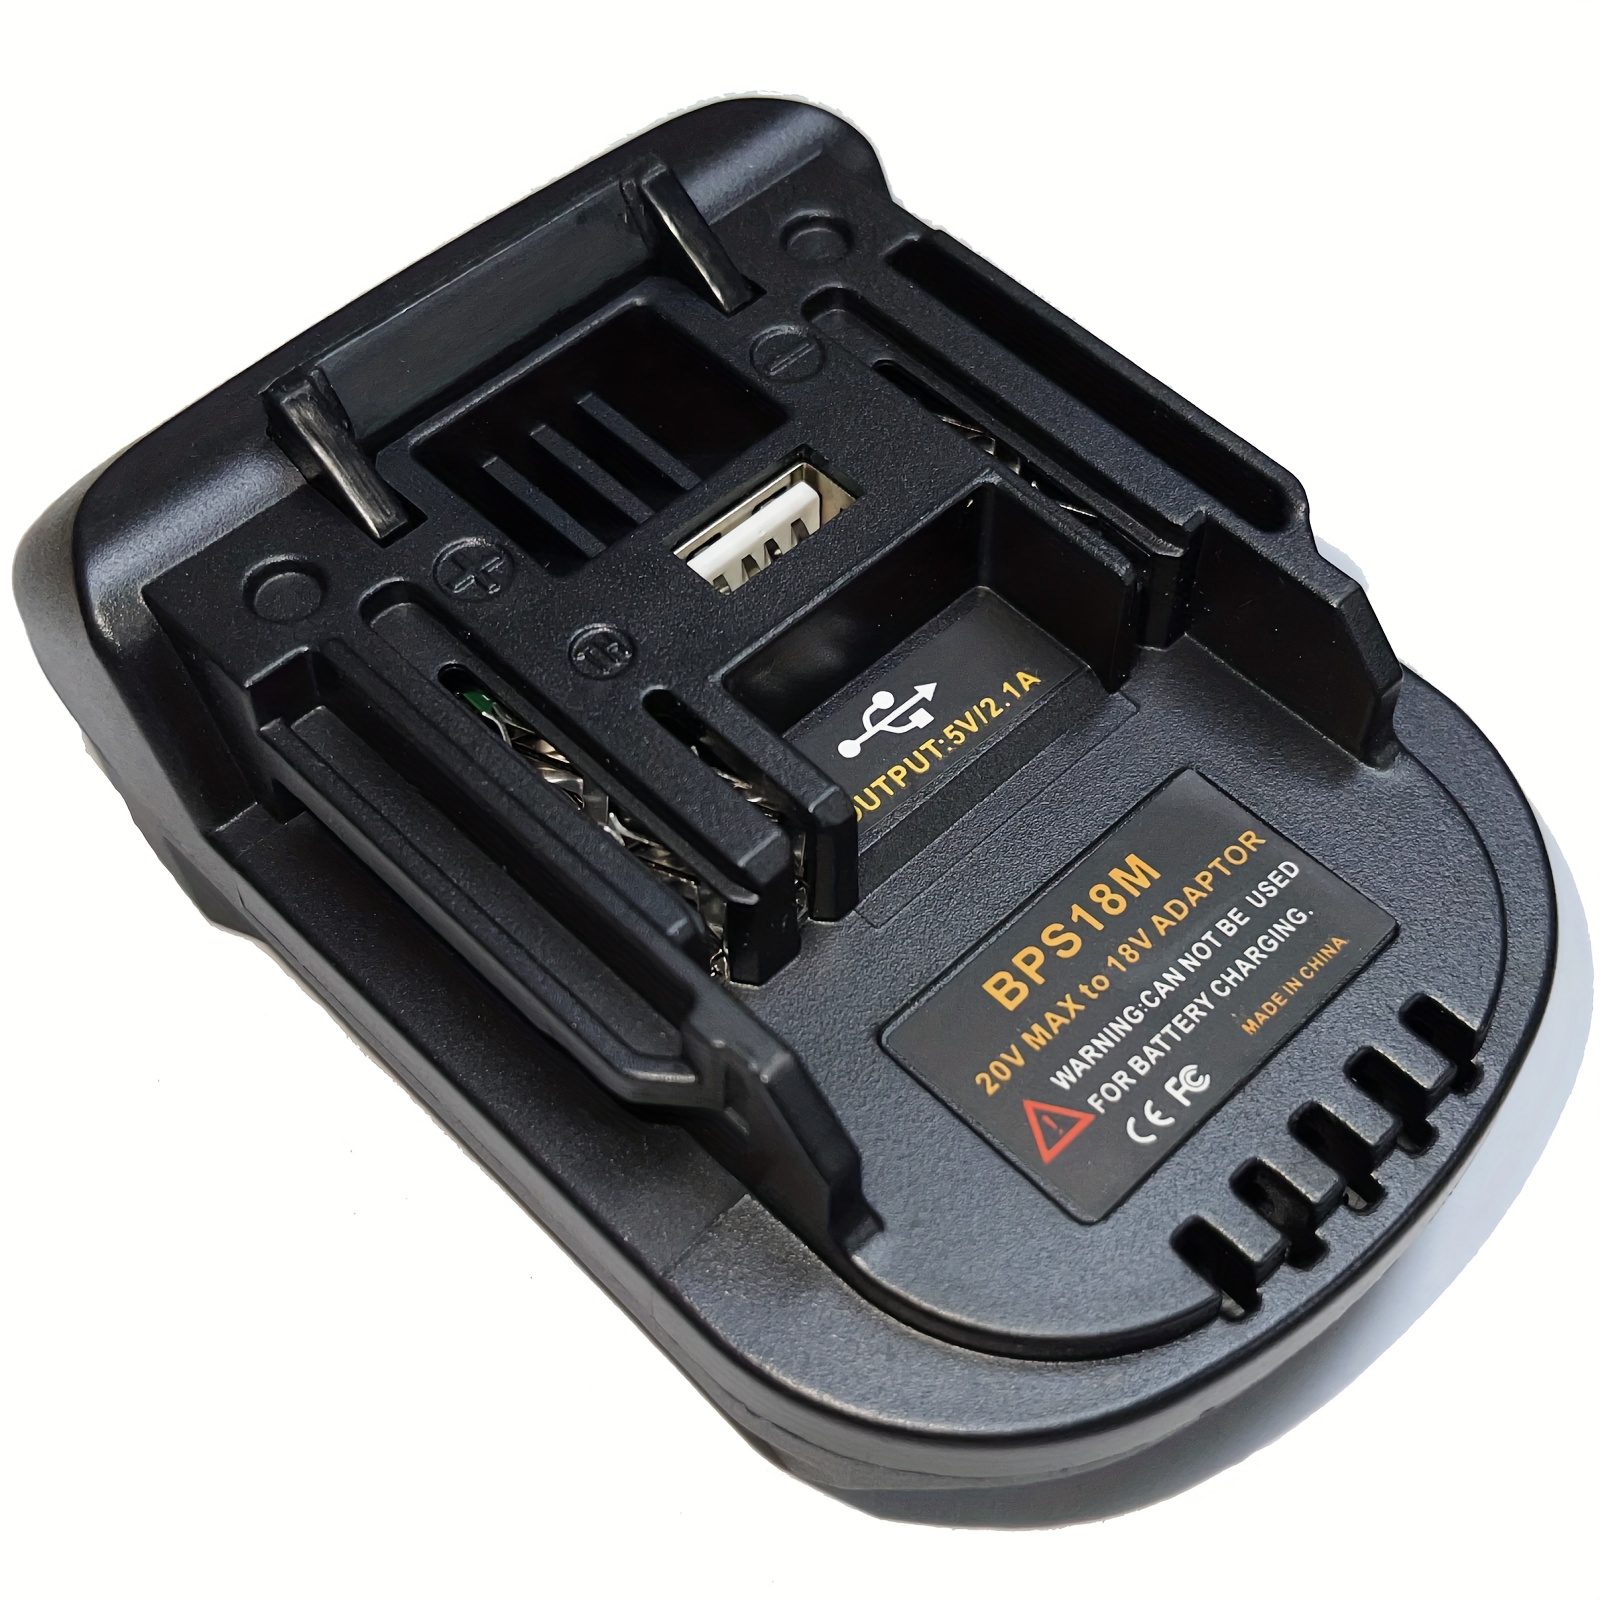 20V Max Li-ion Battery Quick Charger for Black & Decker Porter Cable  Stanley Cordless Power Tools Lithium Baterries